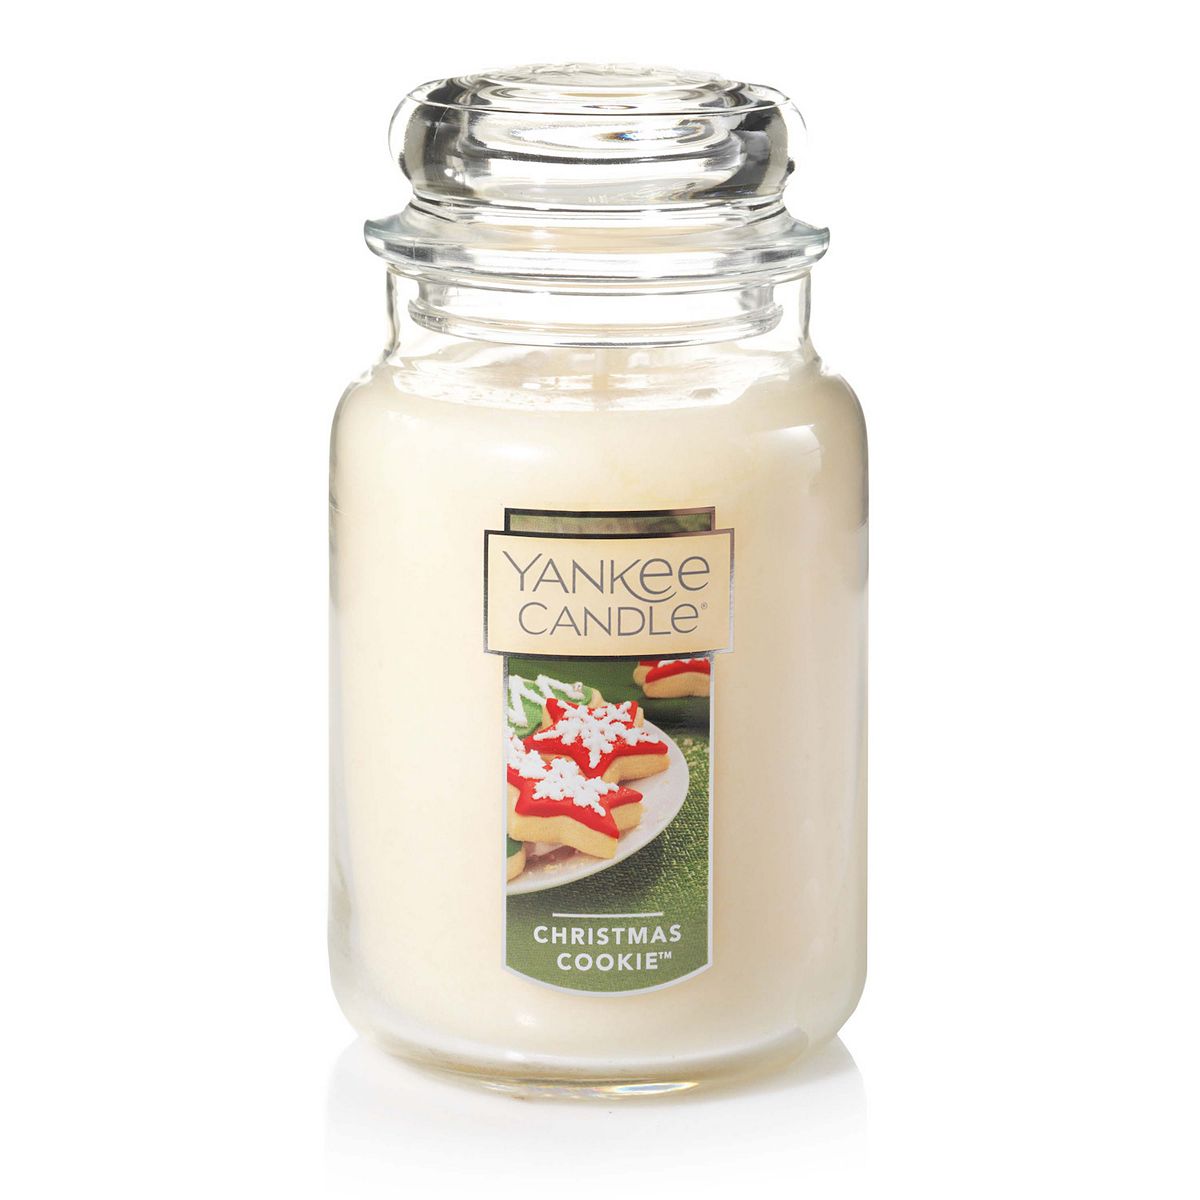 KOHL’S: Large Yankee Candles 22 o.z for $11.79